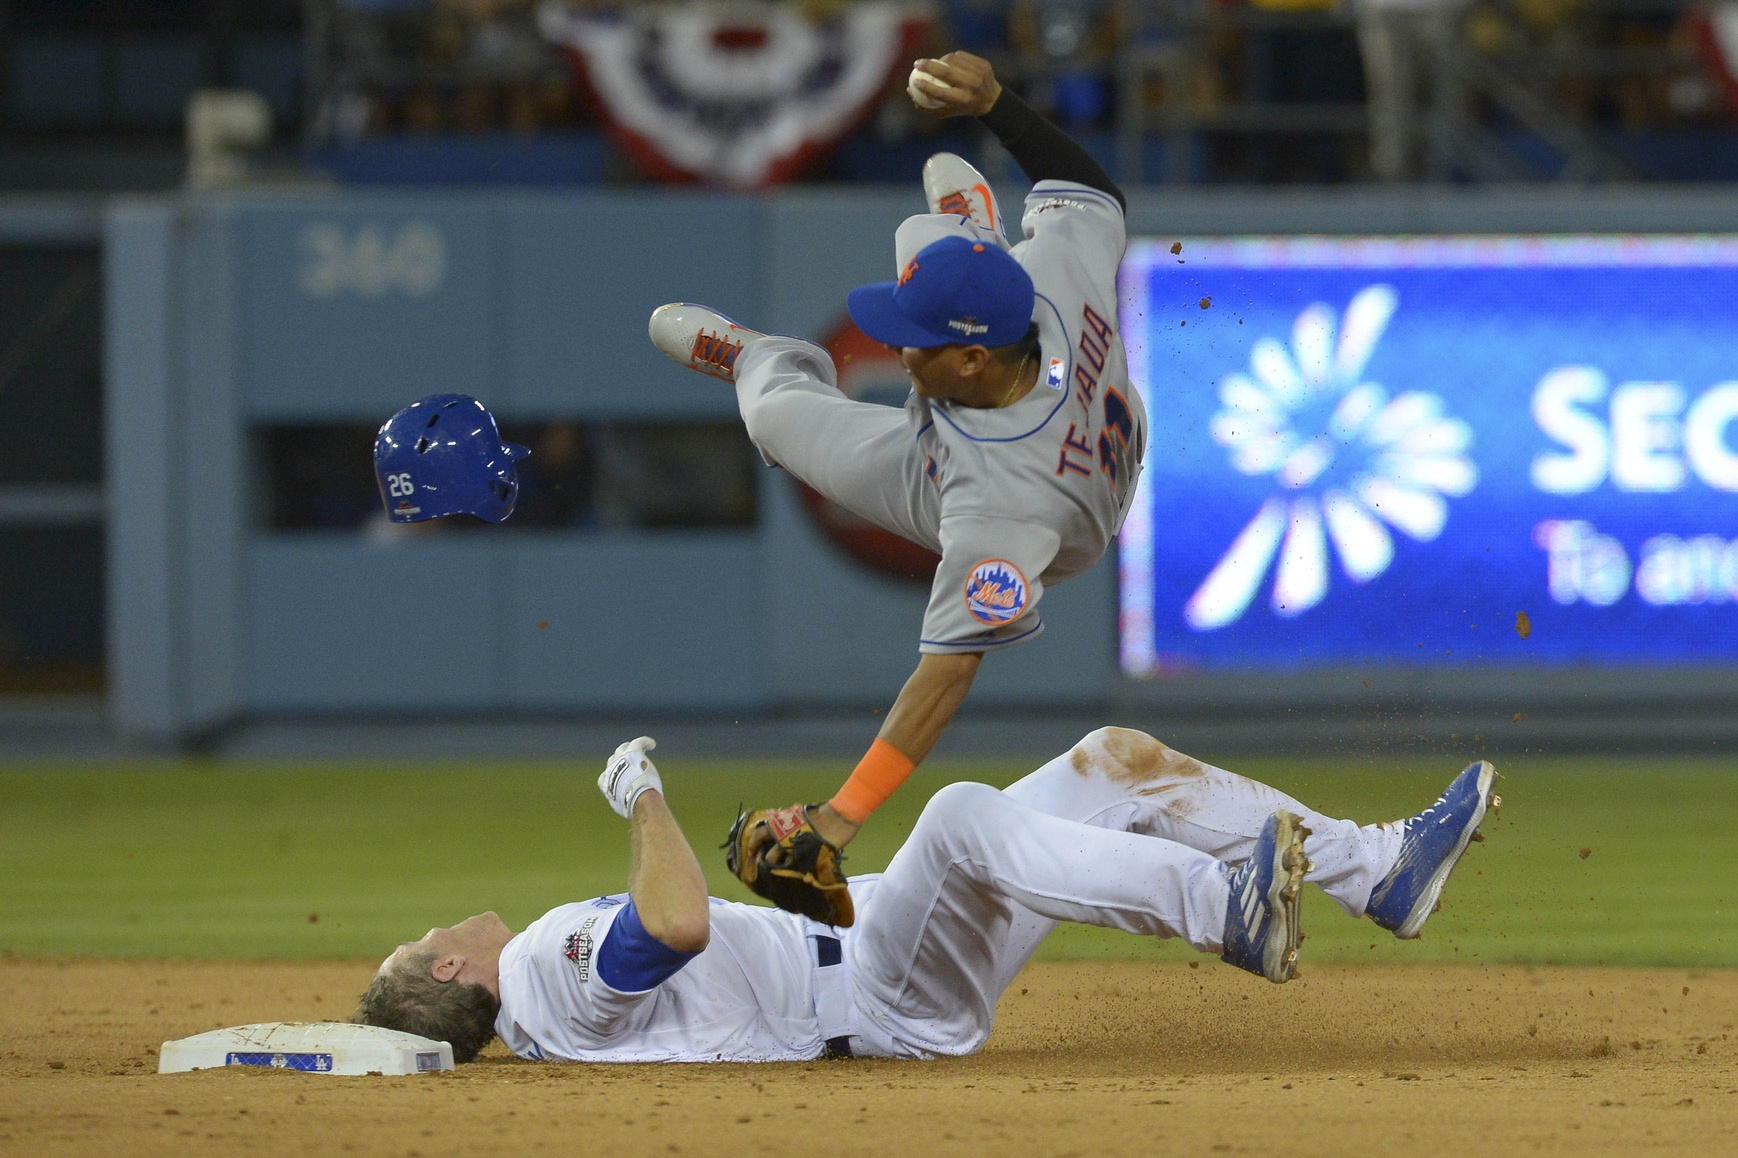 Chase Utley Suspended for Two Games at Citi Field, Will Appeal